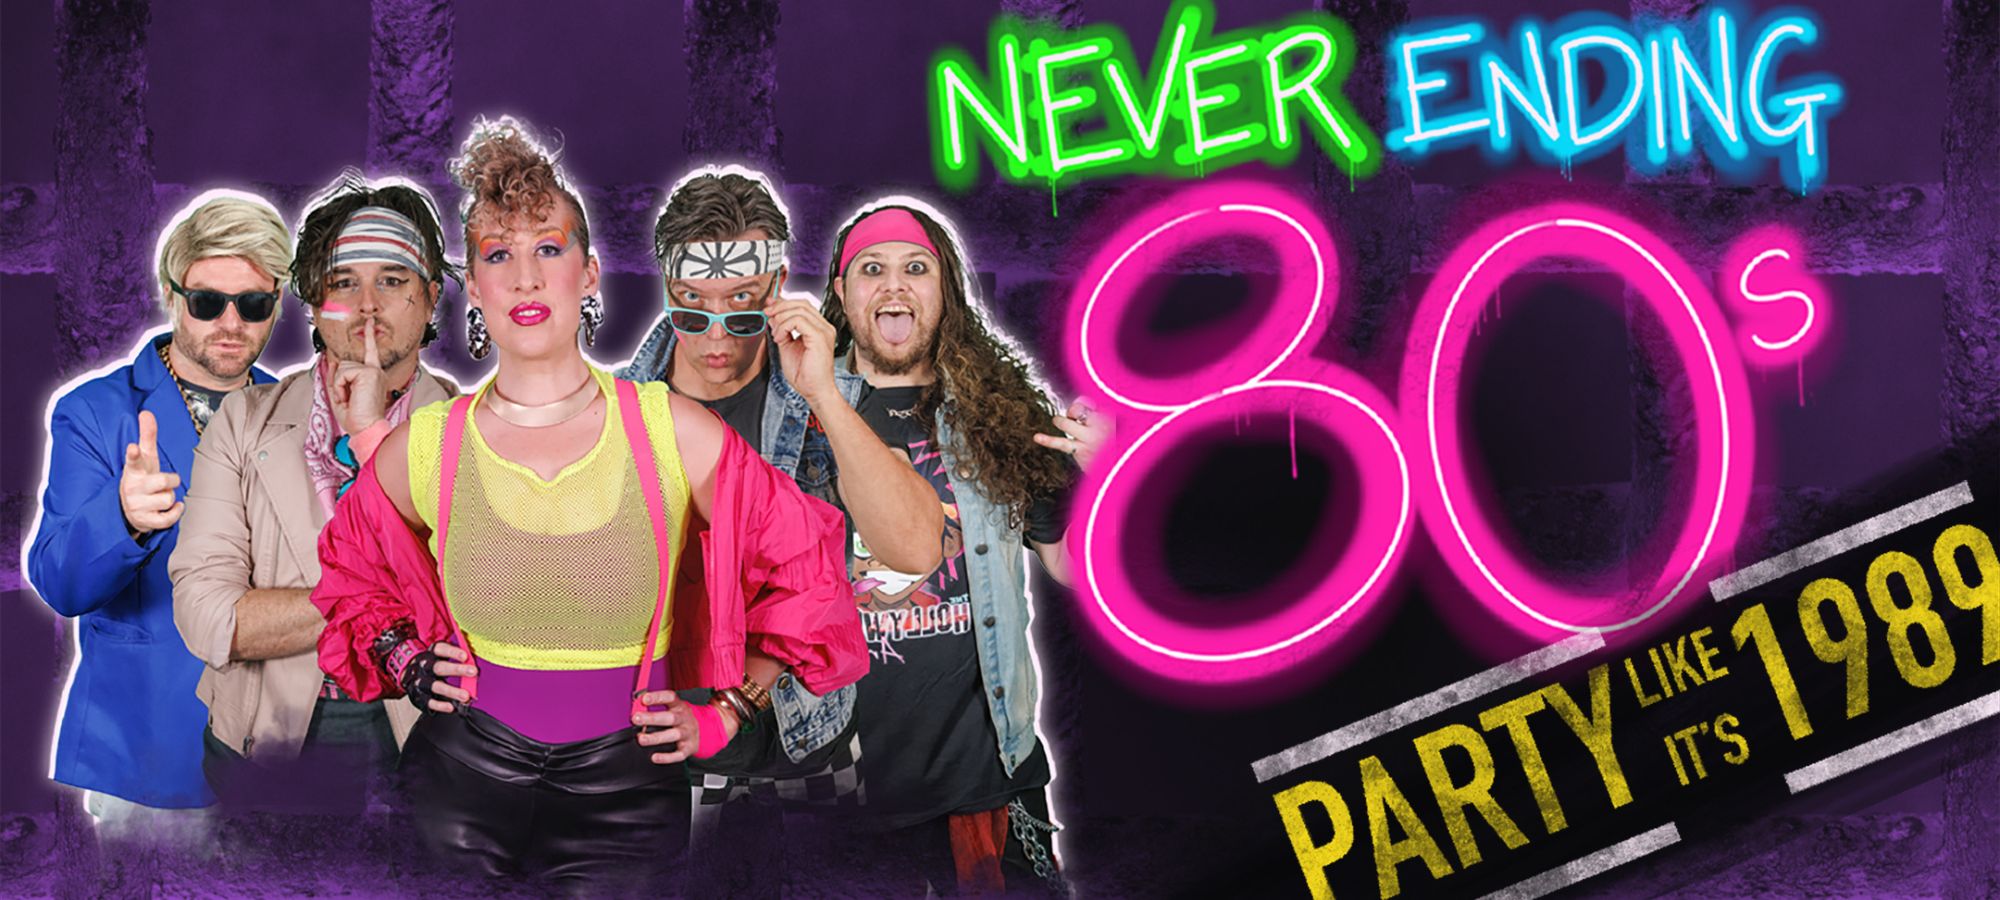 Never Ending 80s - Panthers Penrith